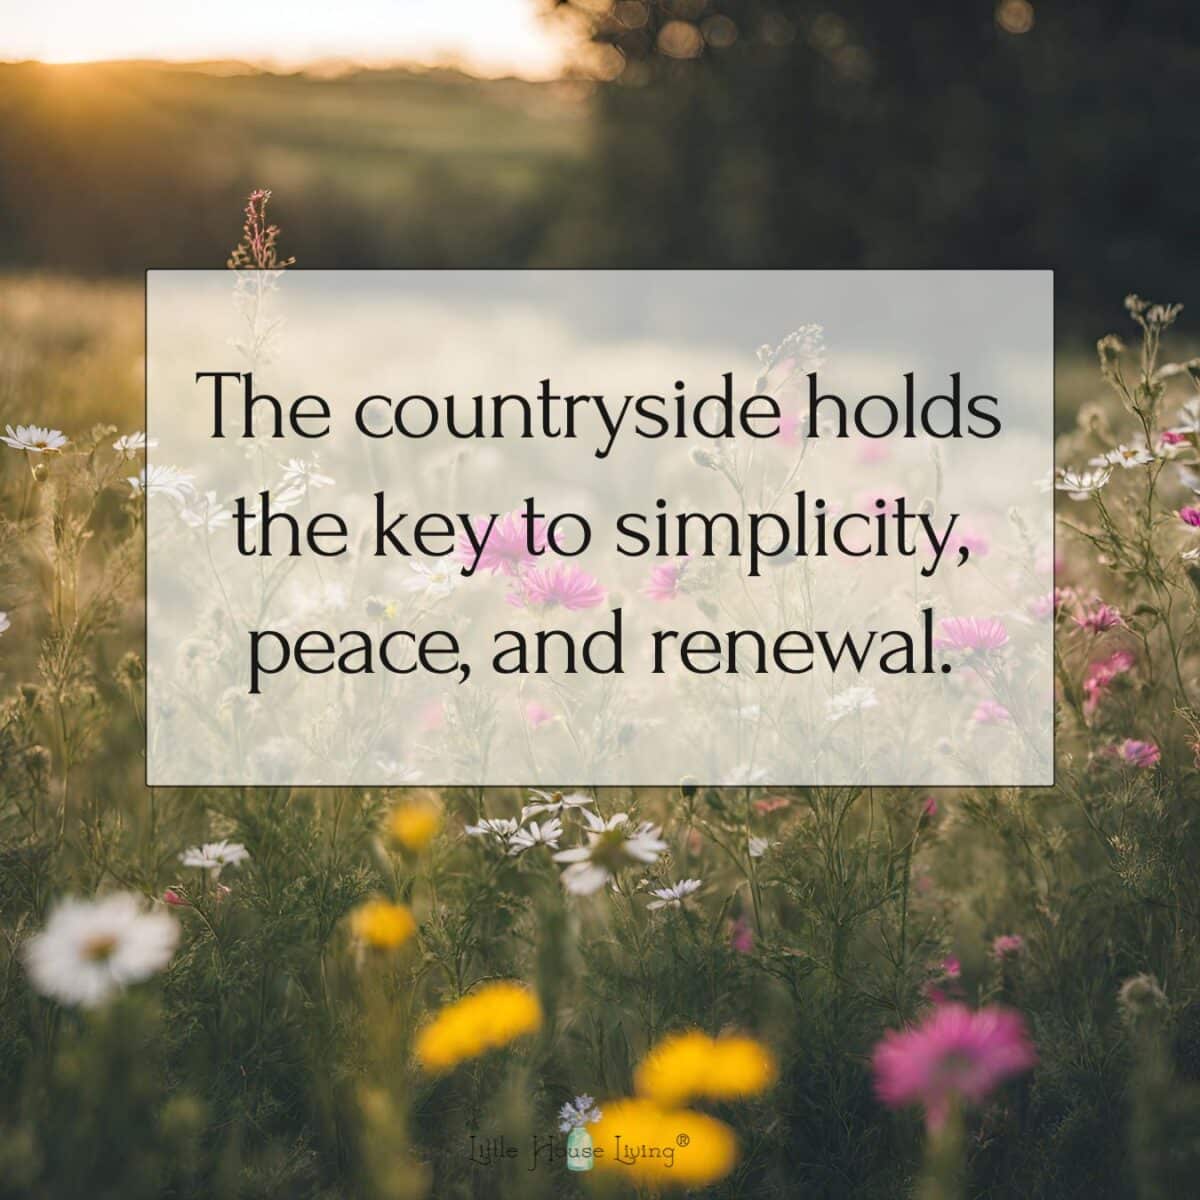 The countryside holds the key to simplicity, peace, and renewal.
